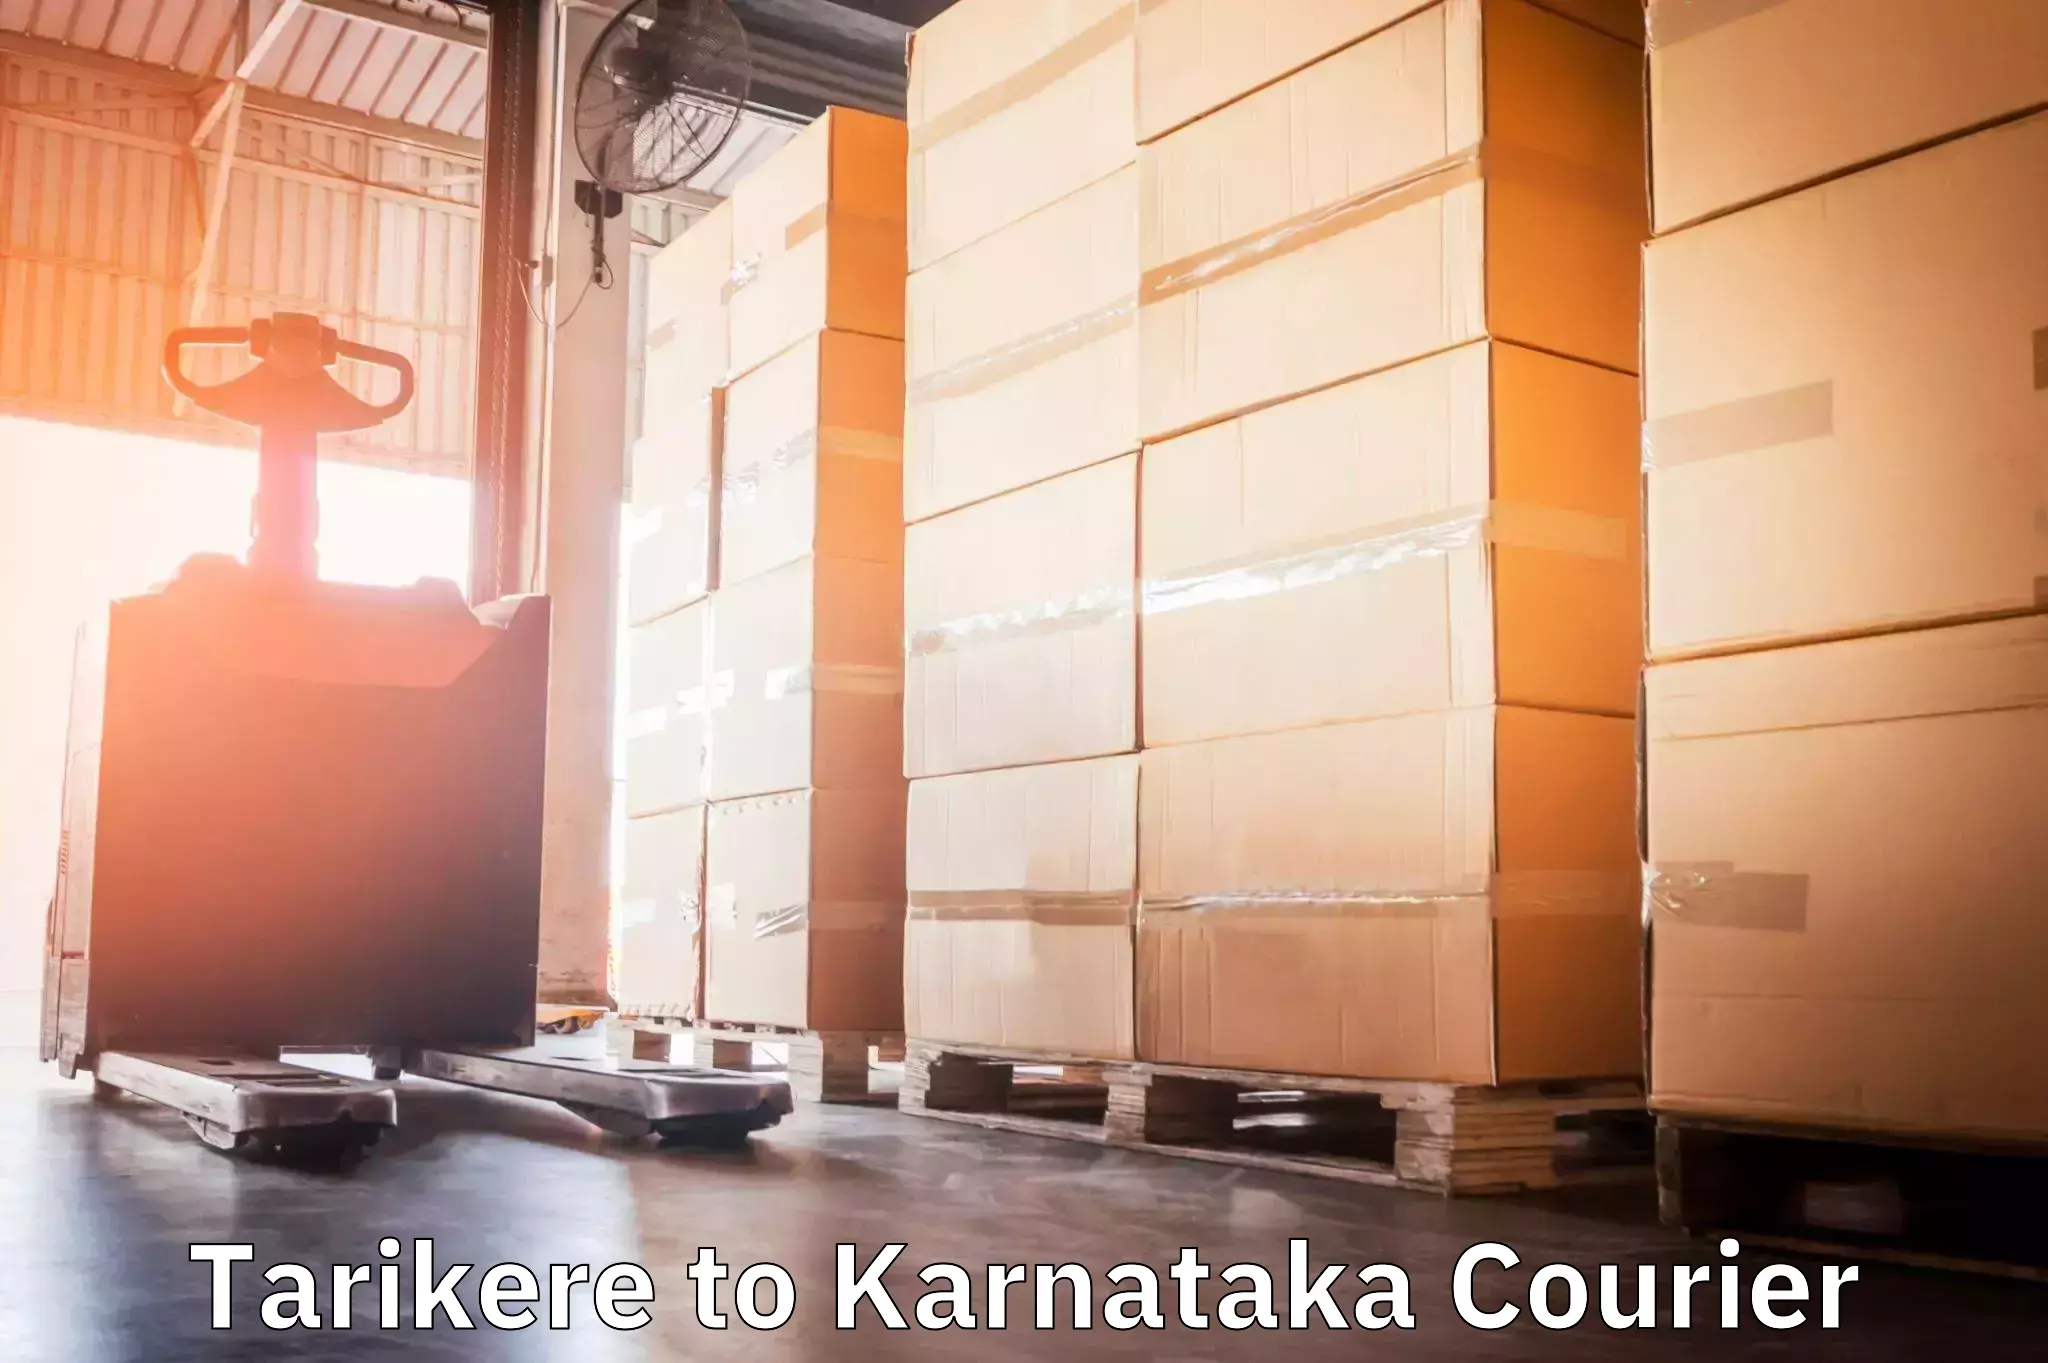 End-to-end delivery Tarikere to Karnataka